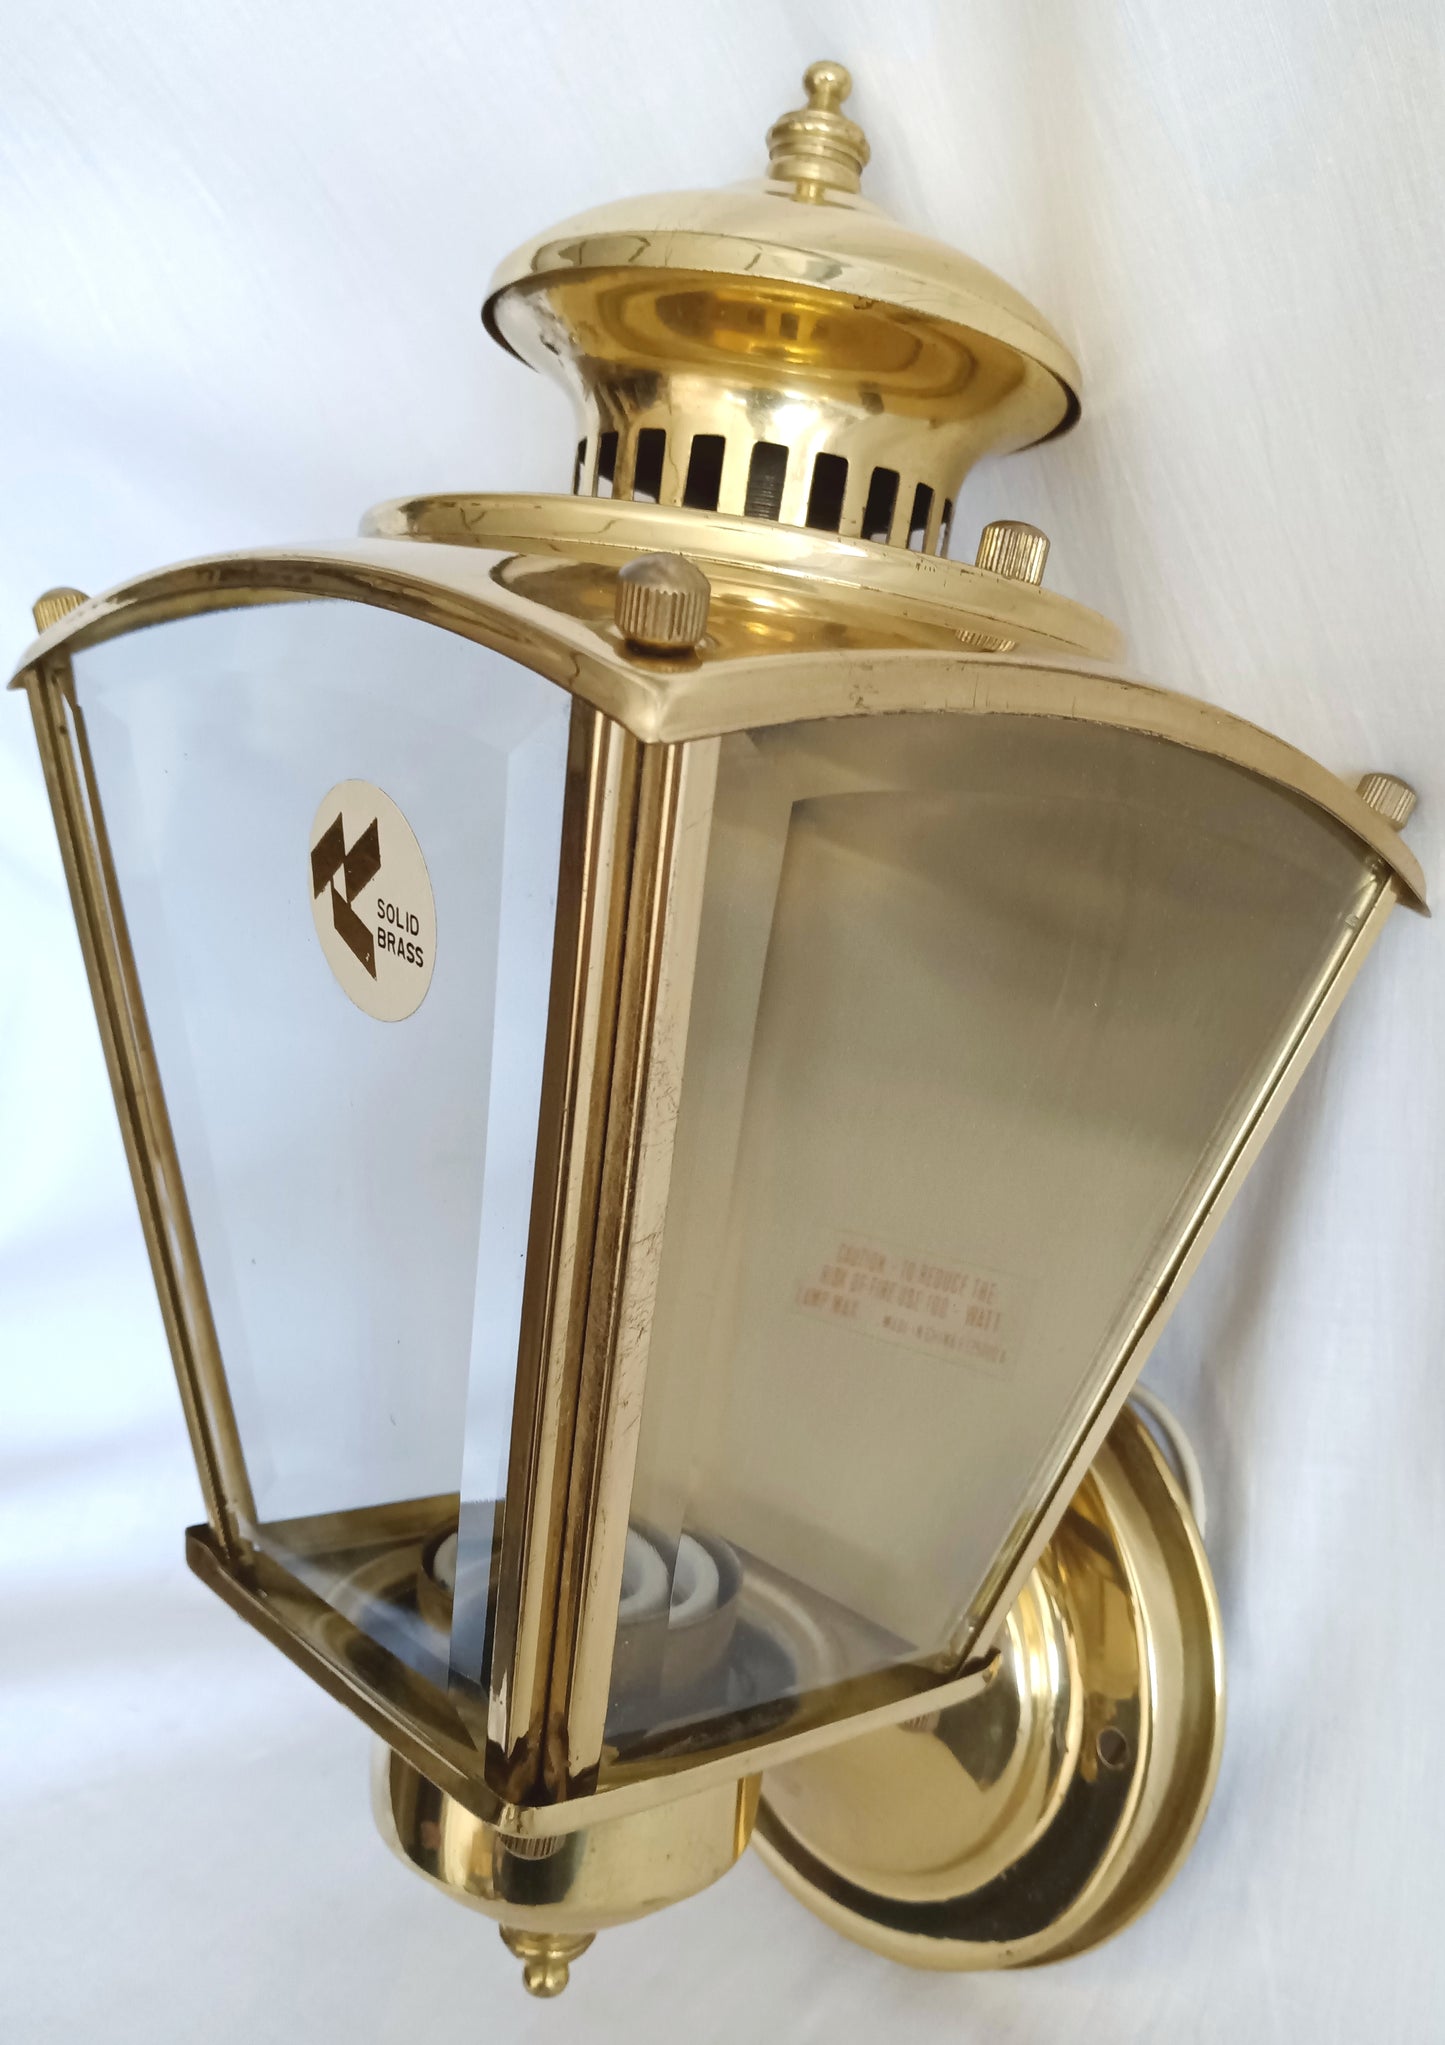 Vintage Outdoor/Indoor One Light Wall Mount Electric Fixture Sconce Lantern Style Polished Solid Brass Beveled Glass Porch Patio Lamp Light